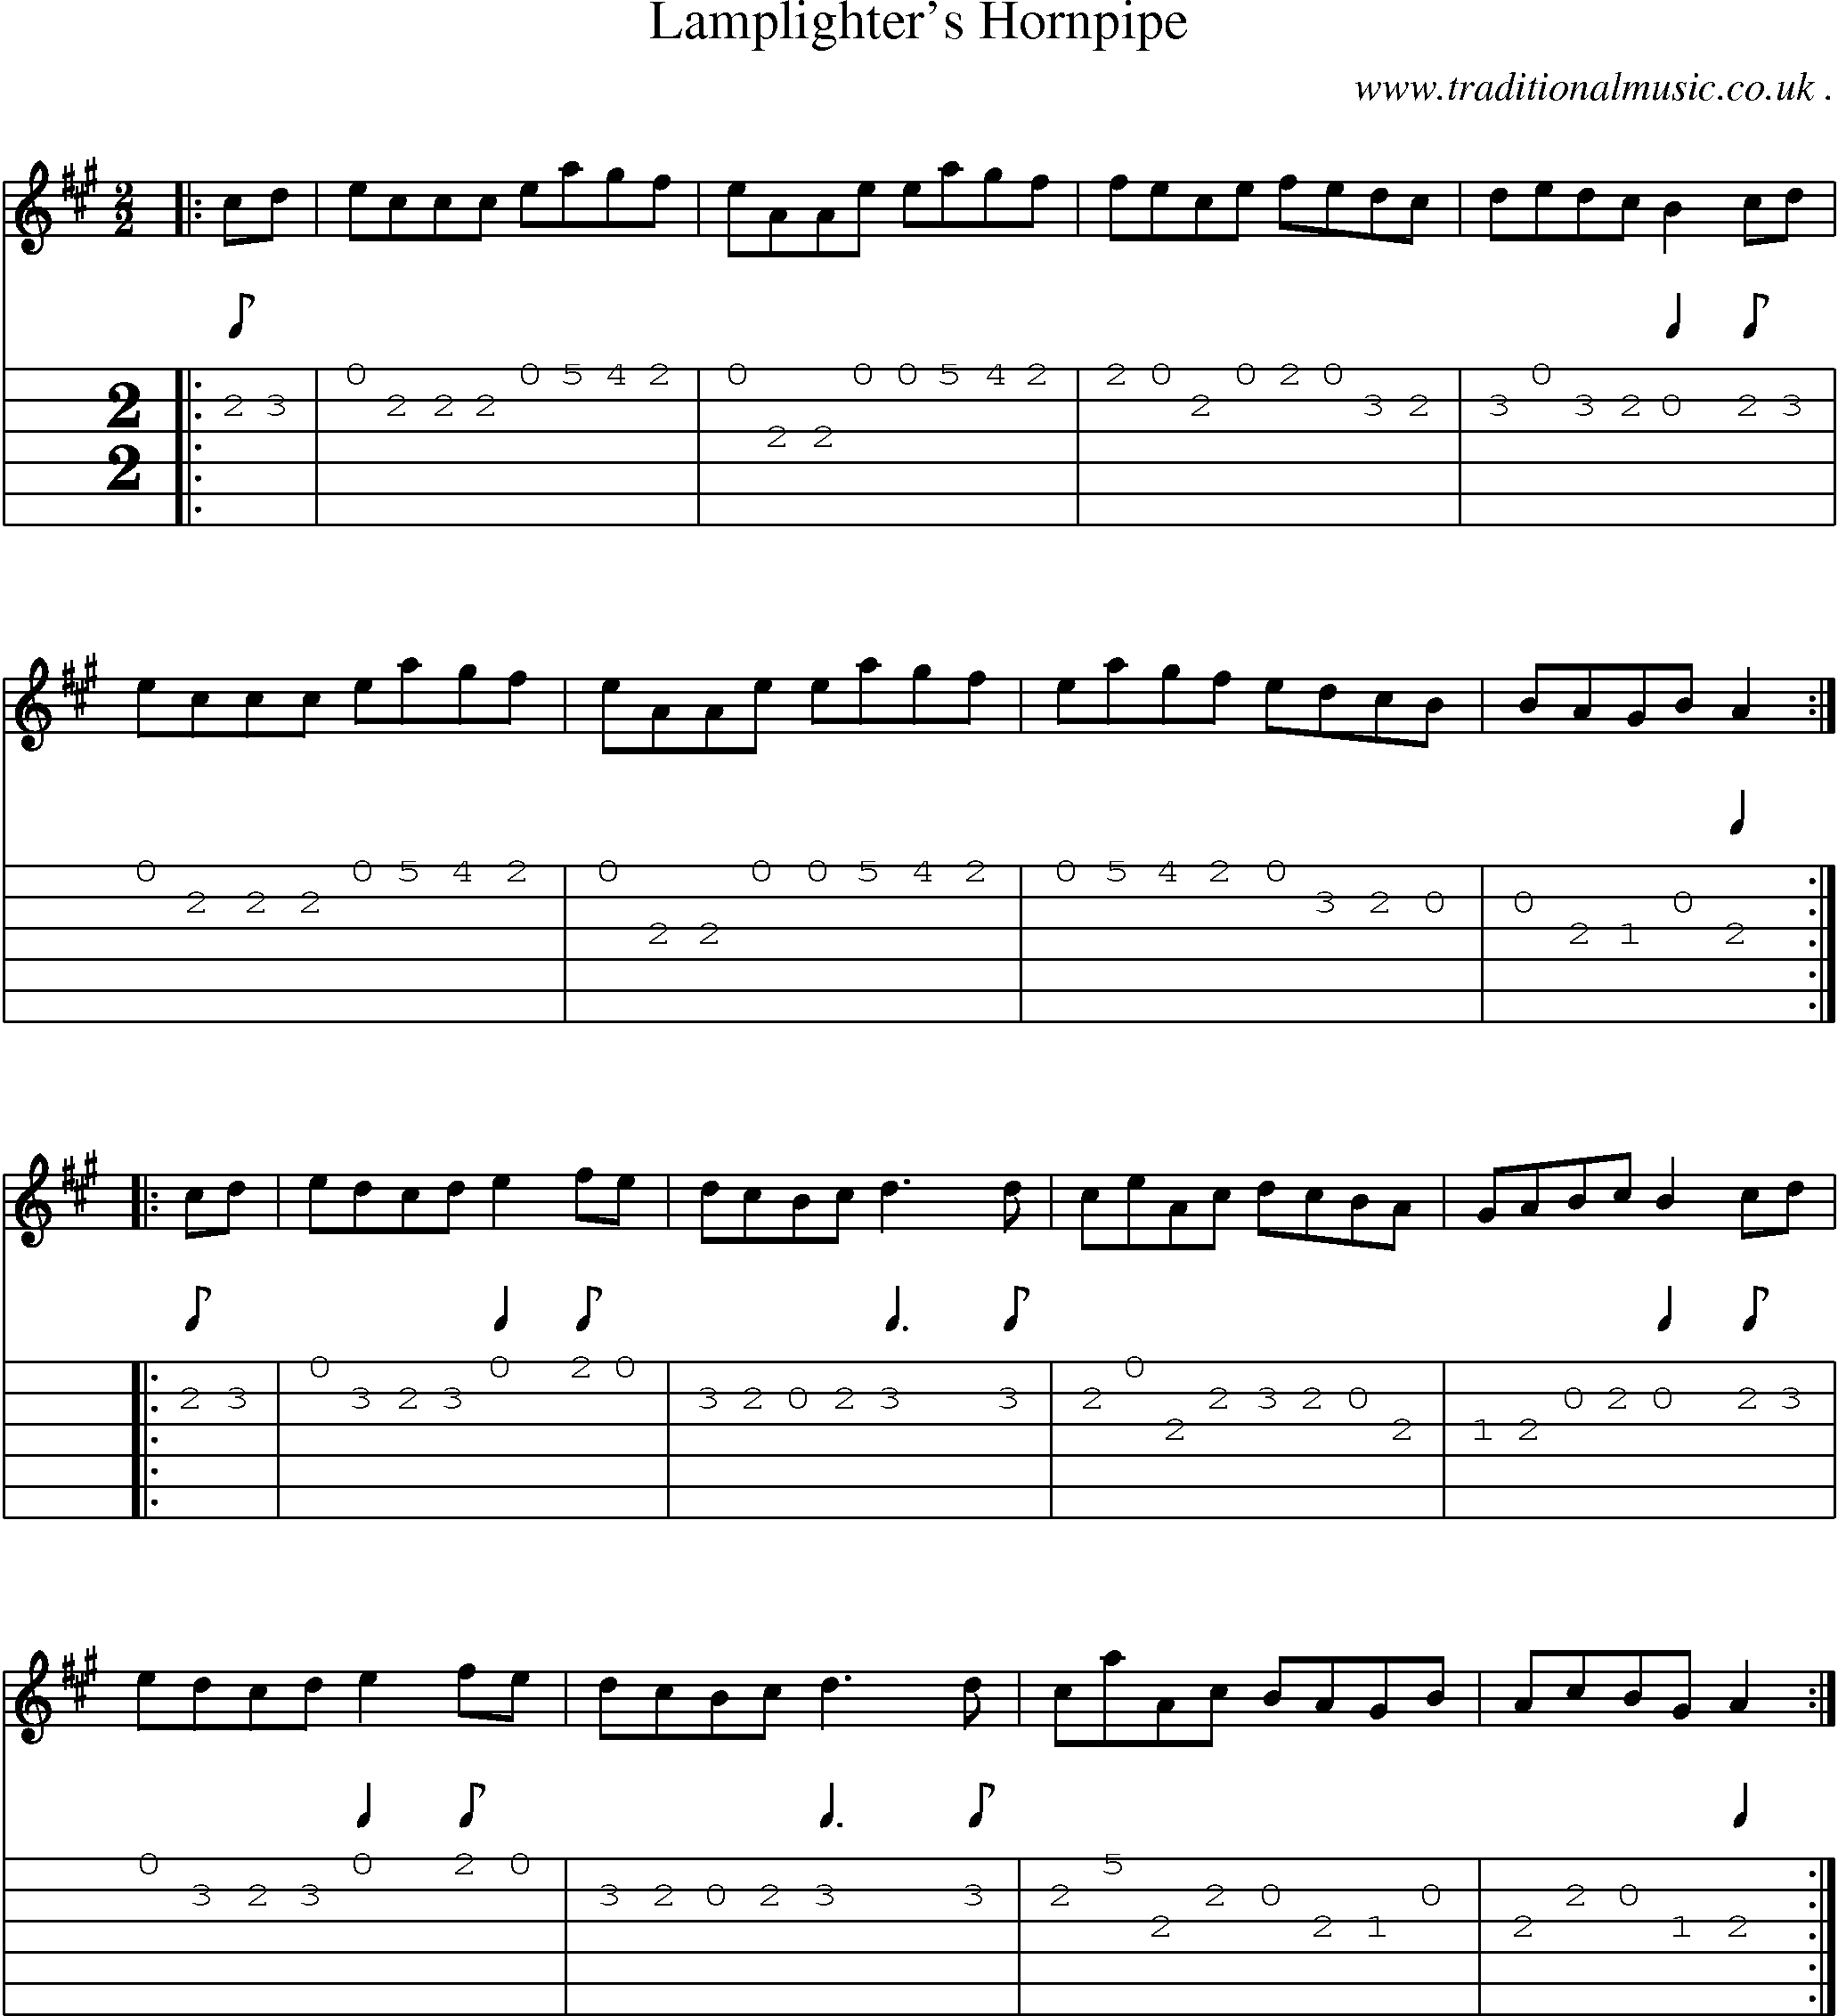 Music Score and Guitar Tabs for Lamplighters Hornpipe1